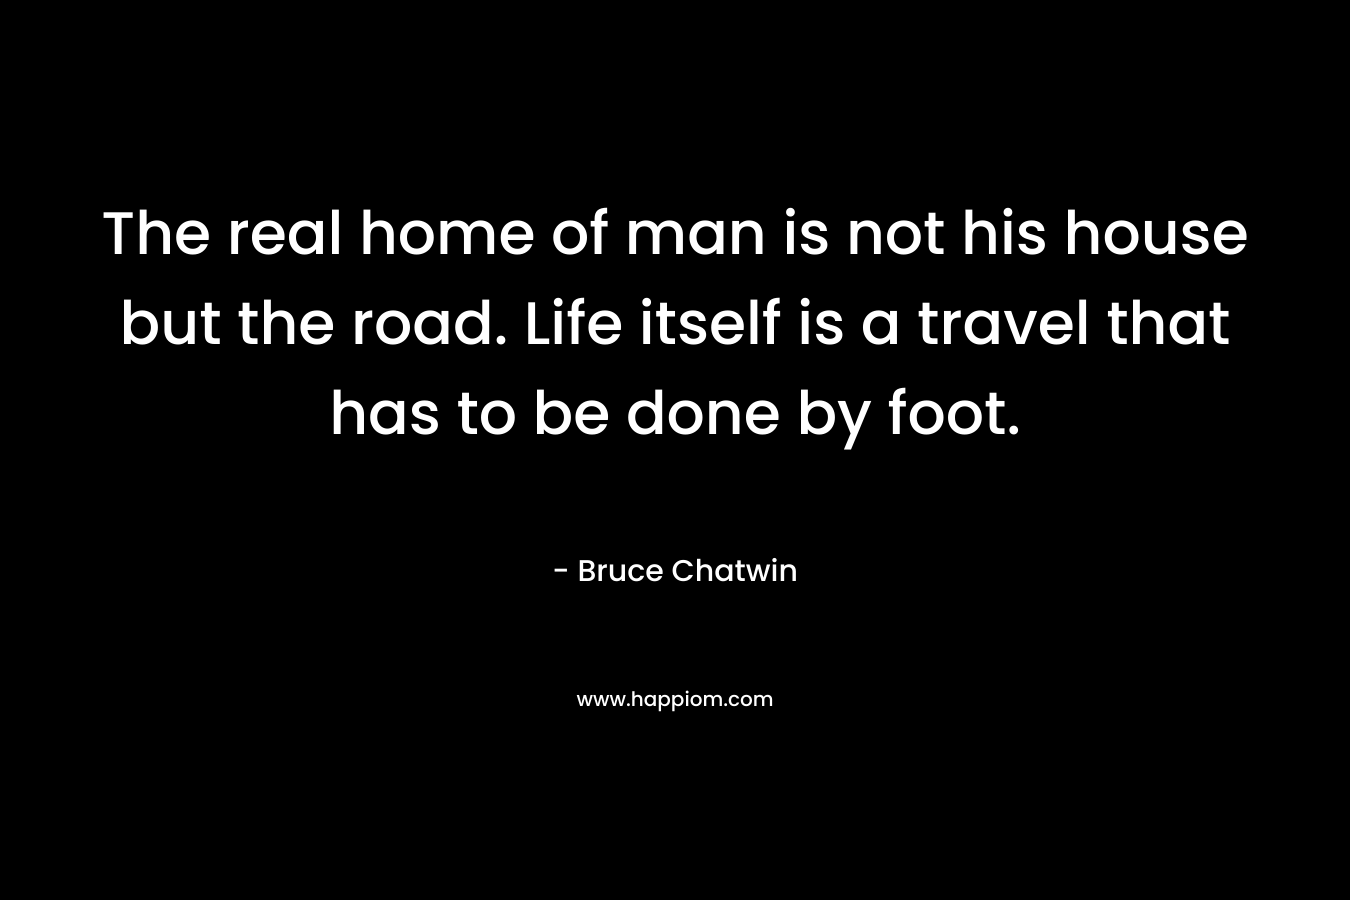 The real home of man is not his house but the road. Life itself is a travel that has to be done by foot.